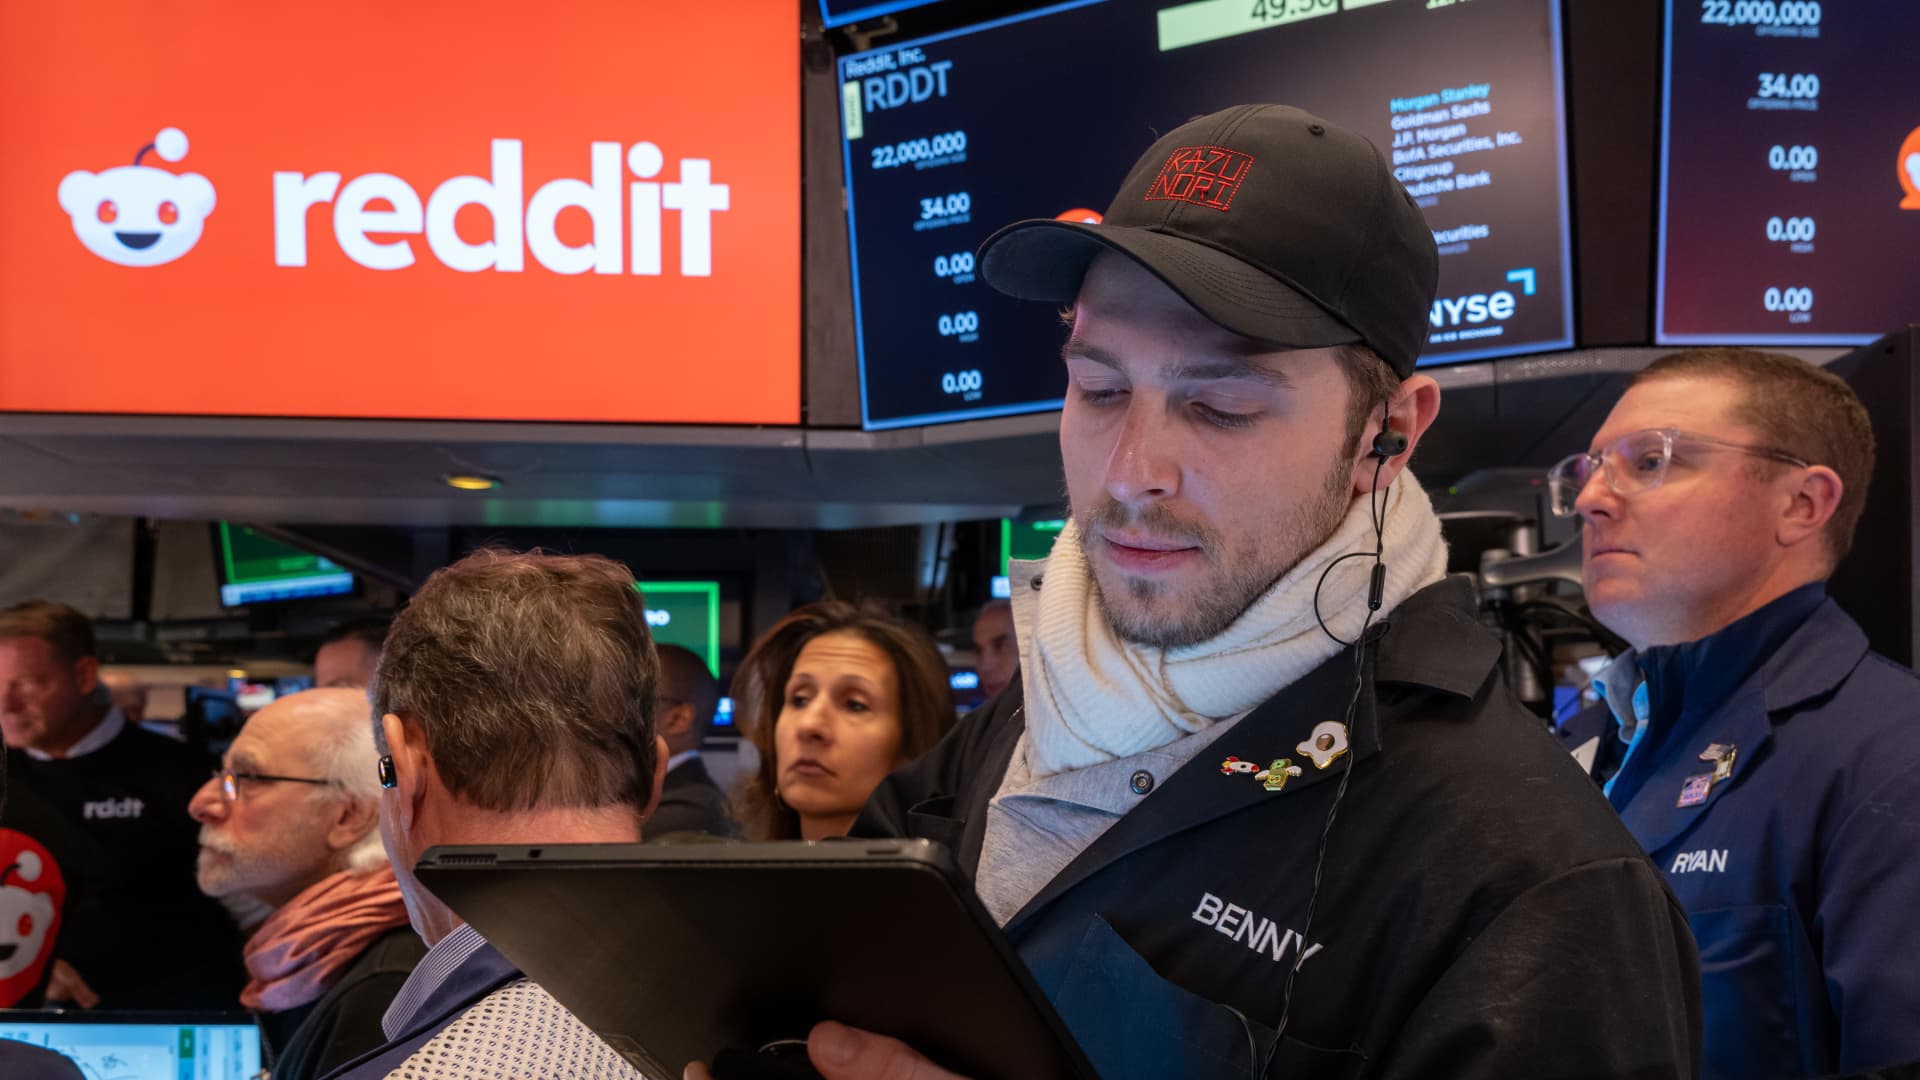 Reddit shares on a two-day tumble after post-IPO high